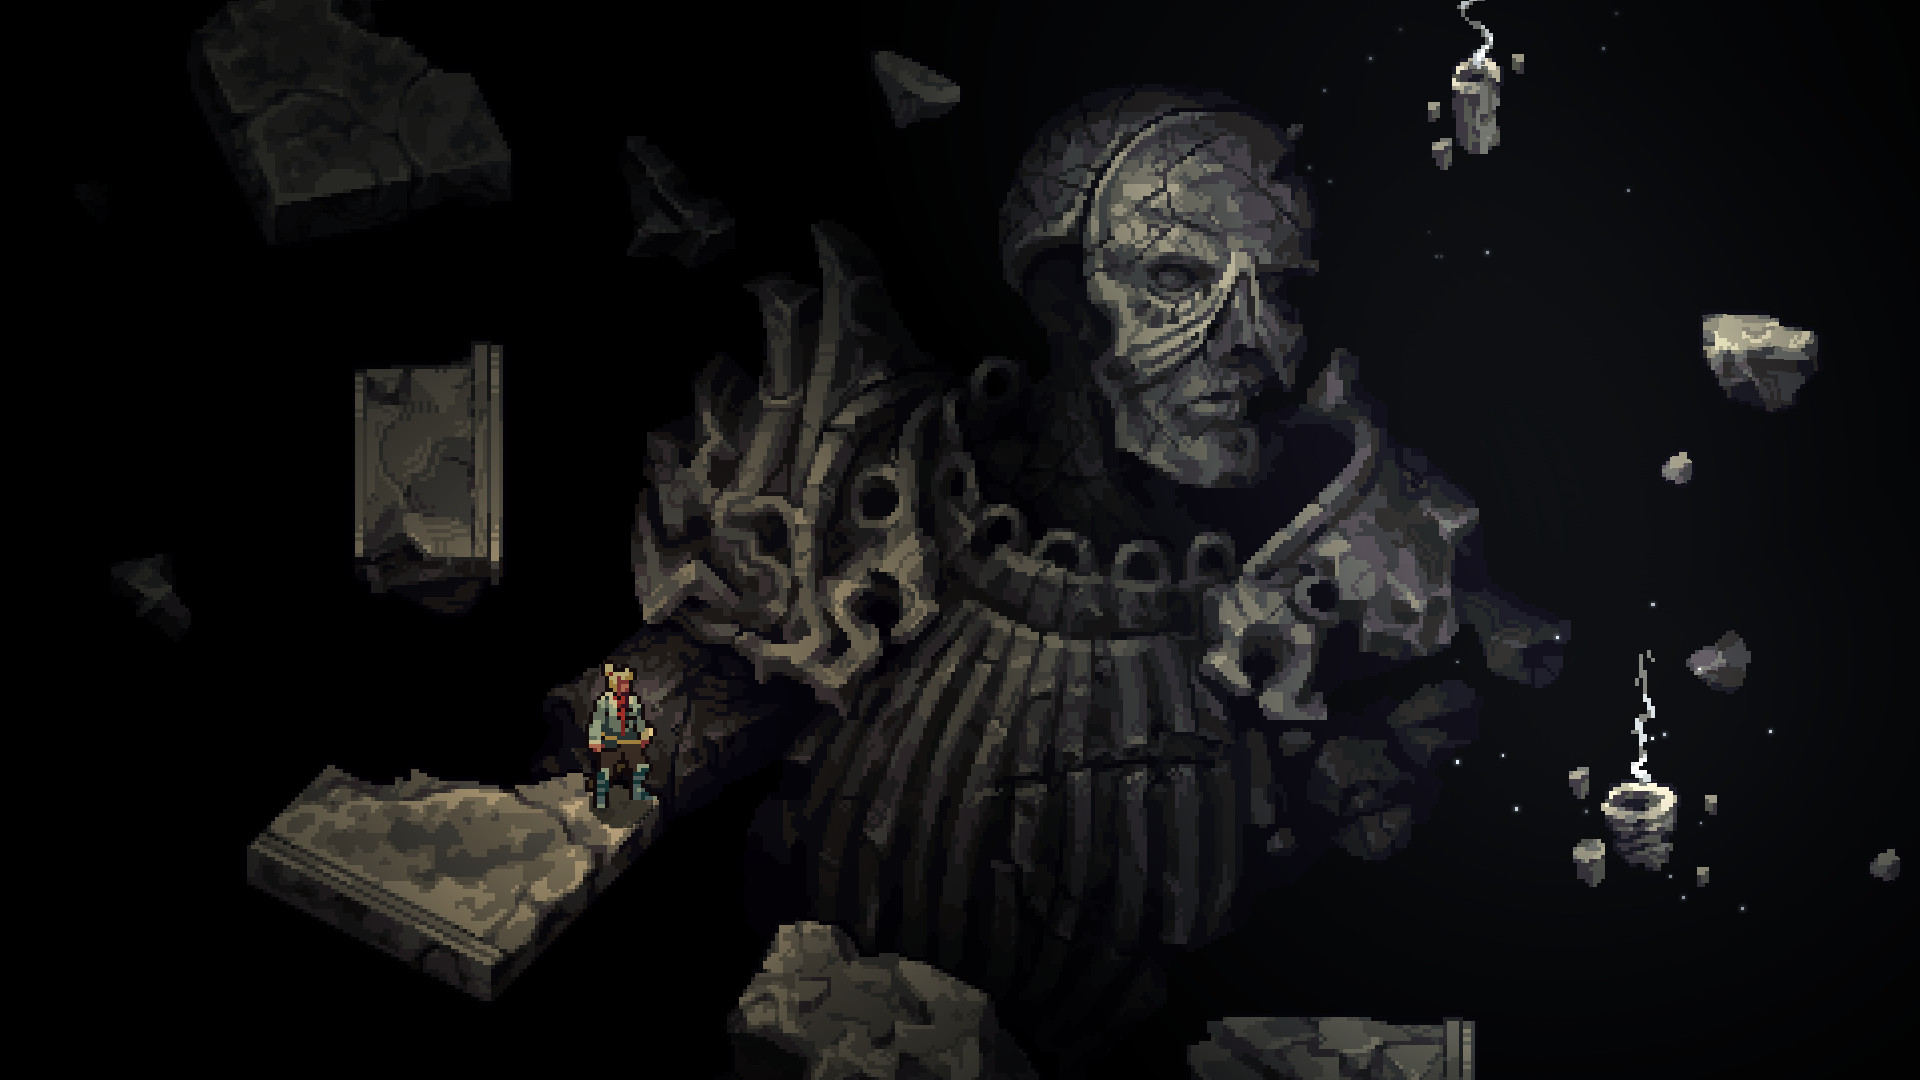 Soulslike RPG There Is No Light has impressively gory pixel art